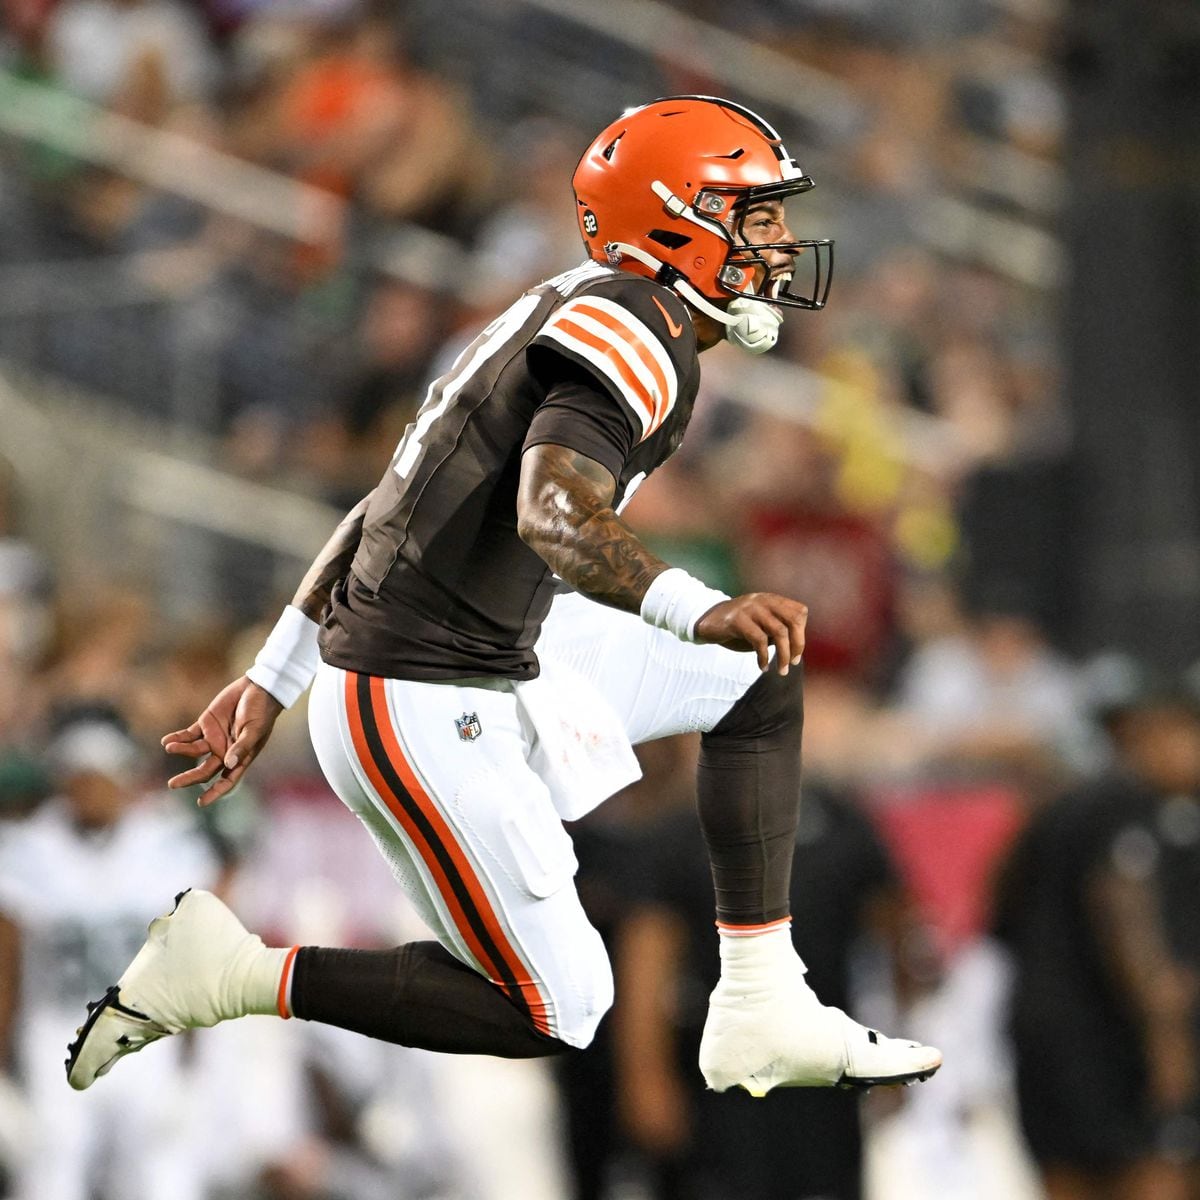 Cleveland Browns debut Color Rush uniforms after years of waiting